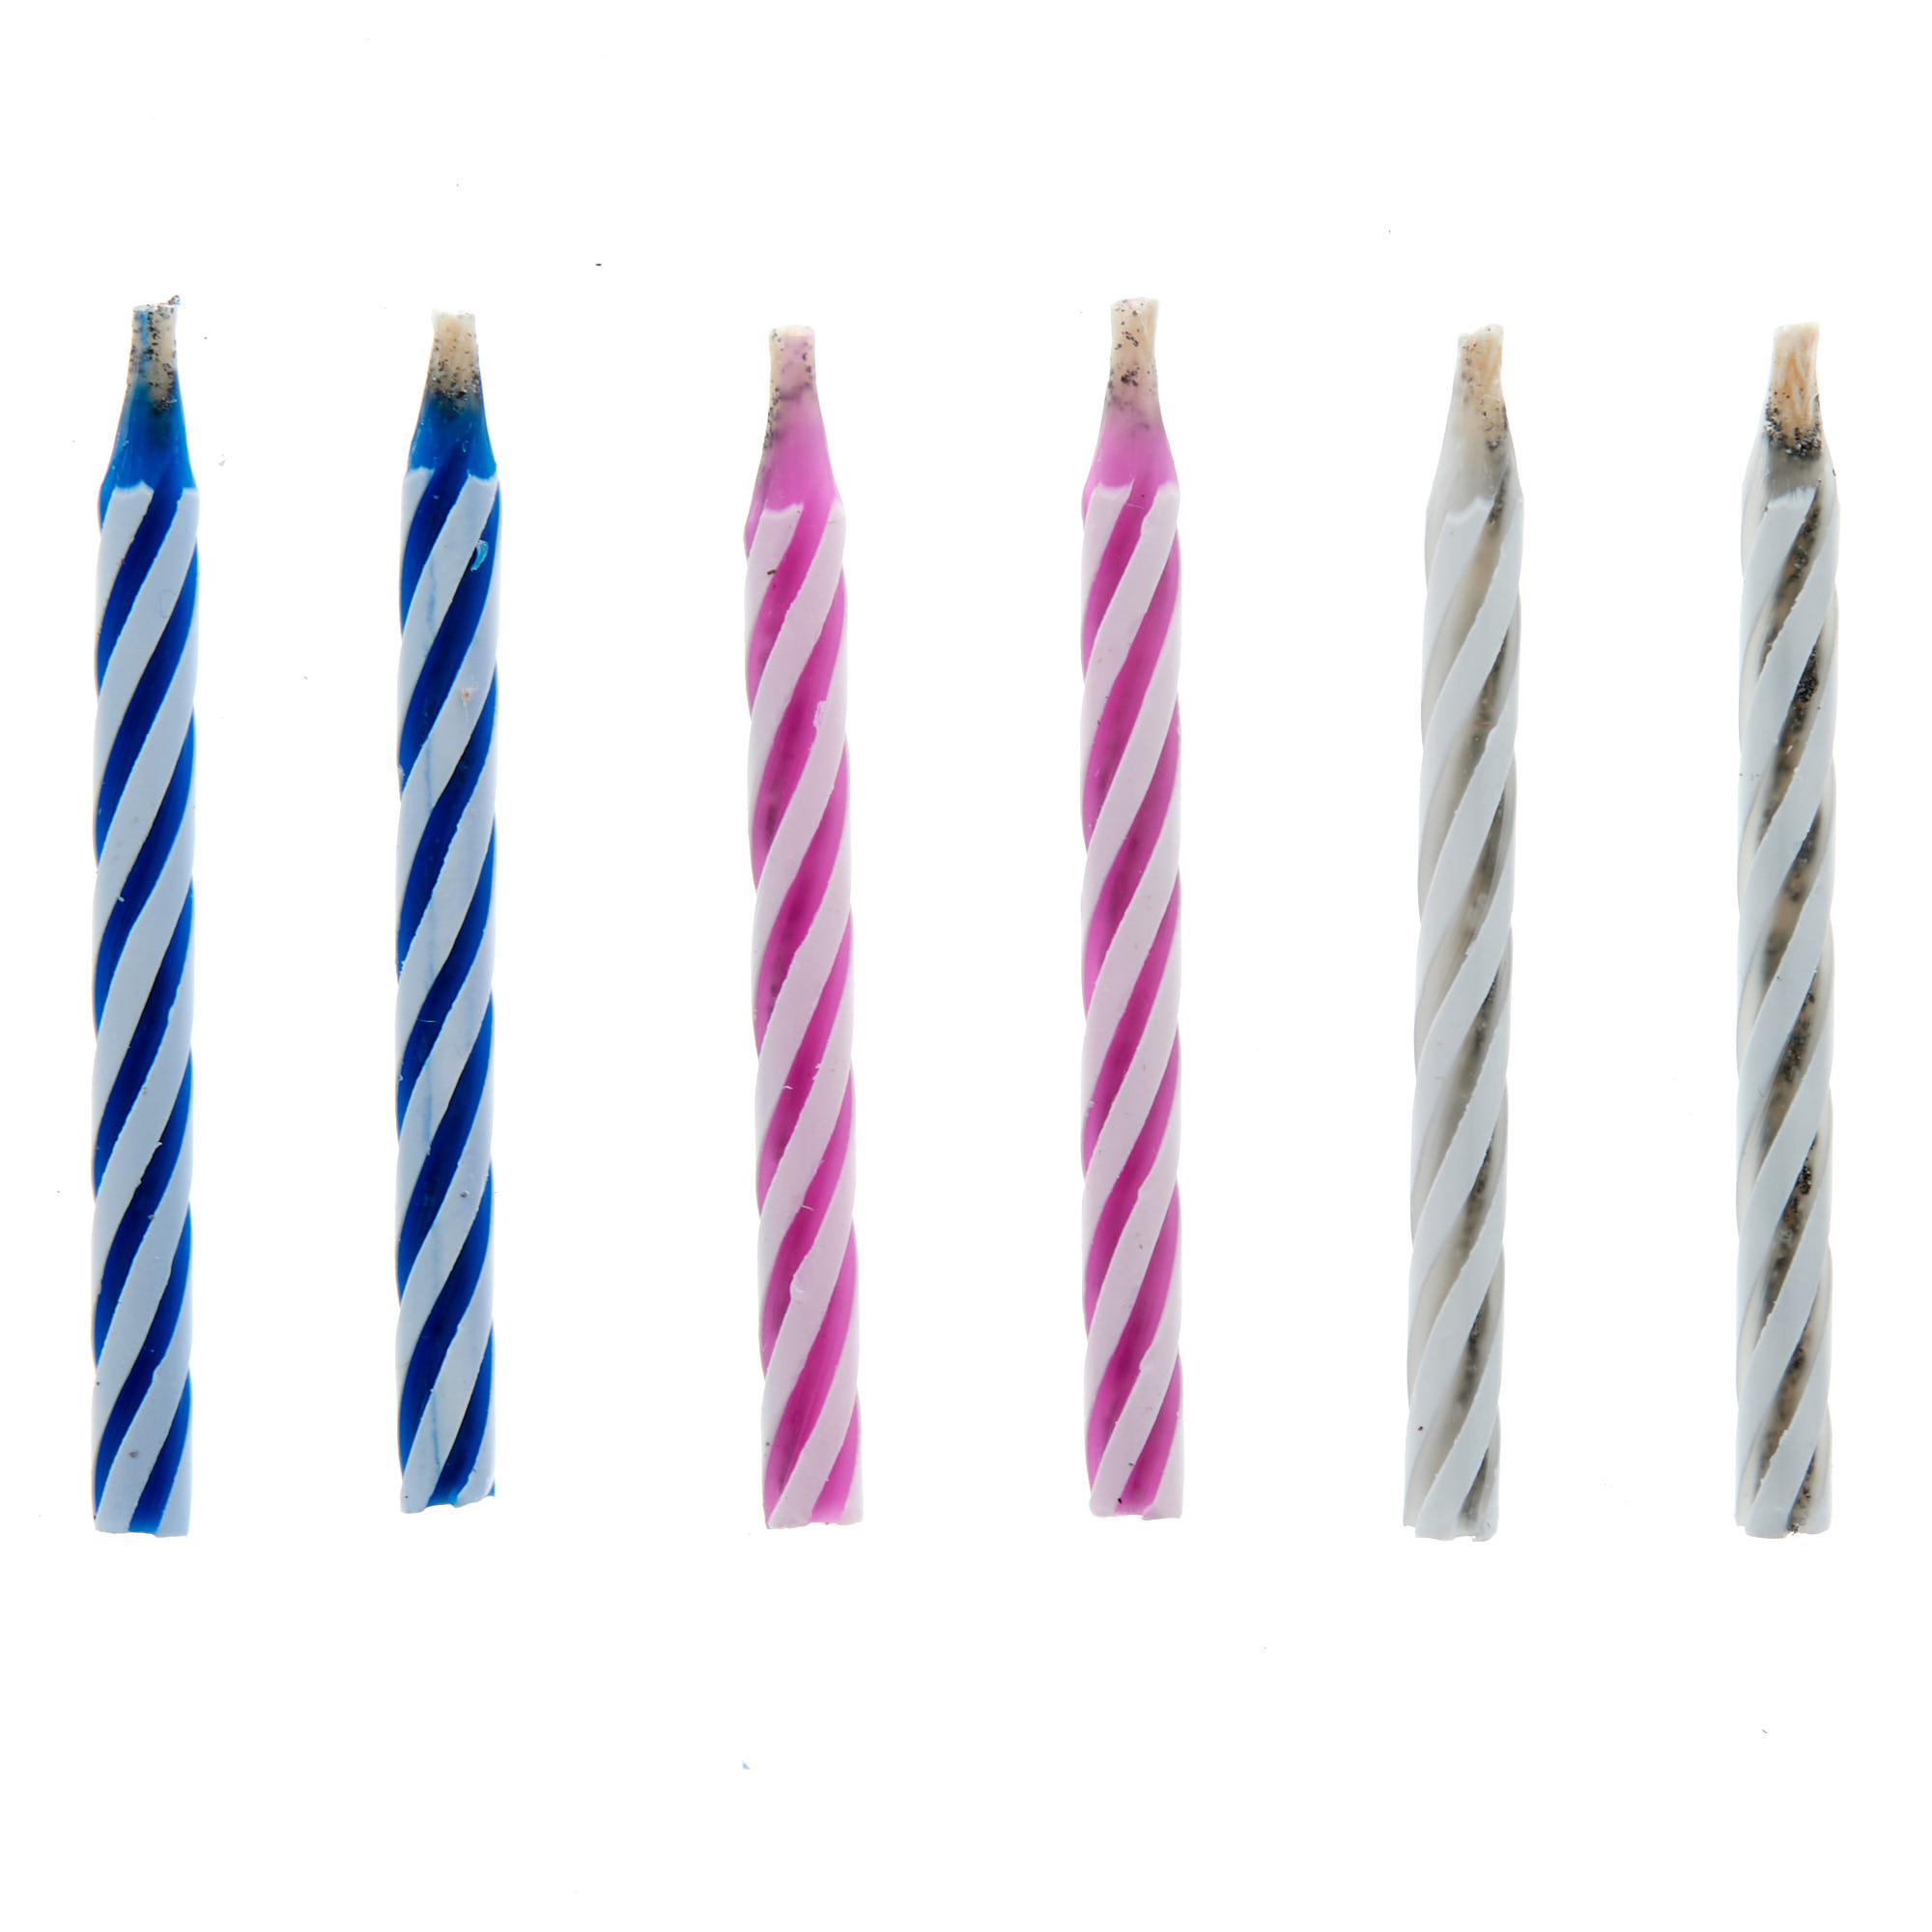 Striped Relighting Birthday Candles - Pack of 10